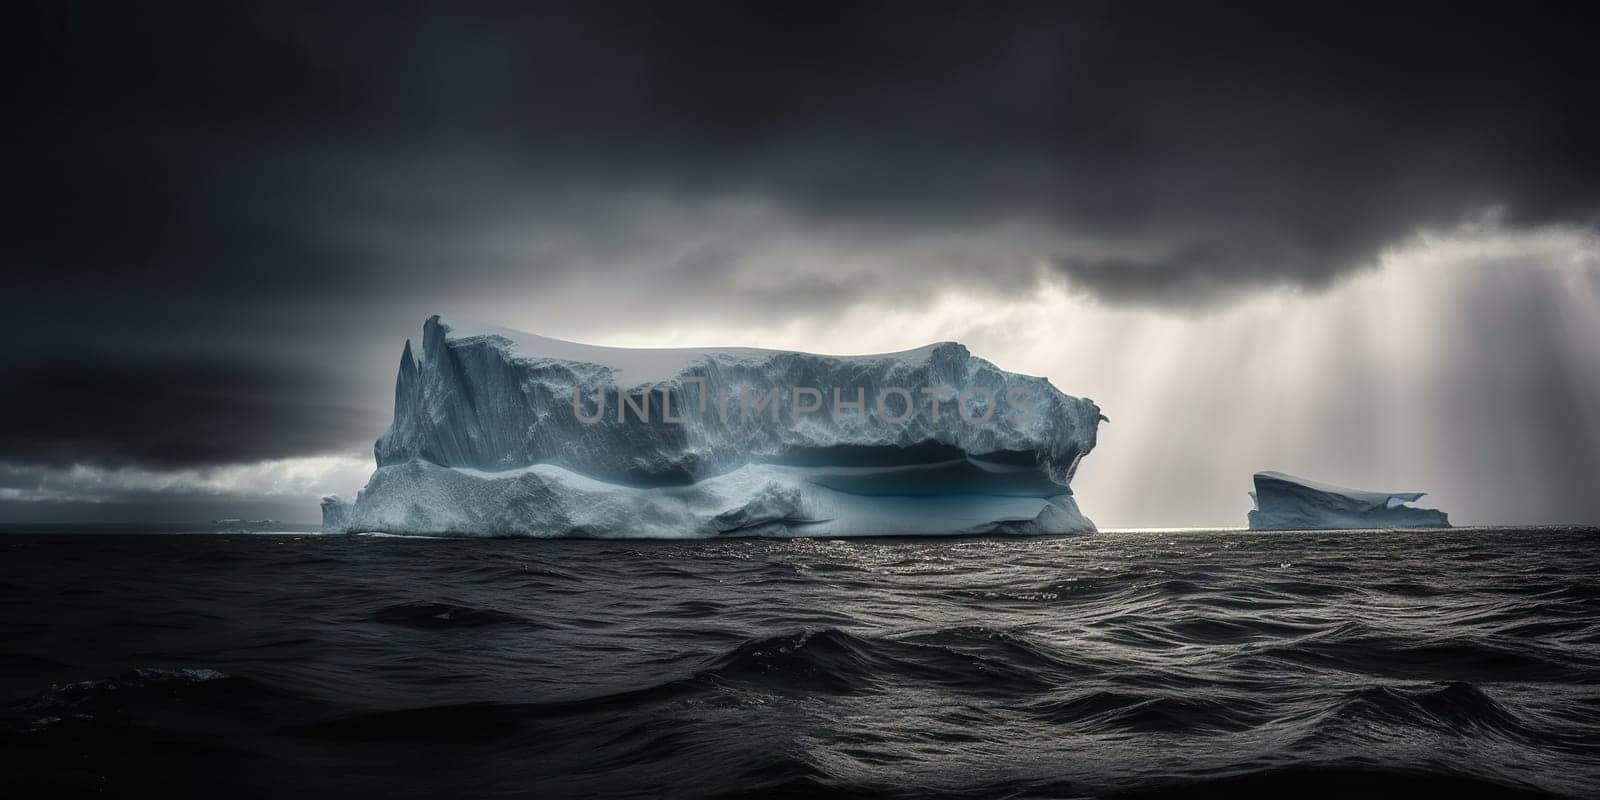 Large Iceberg Bobbing On The Stormy, Cold Waves Of The Northern Ocean